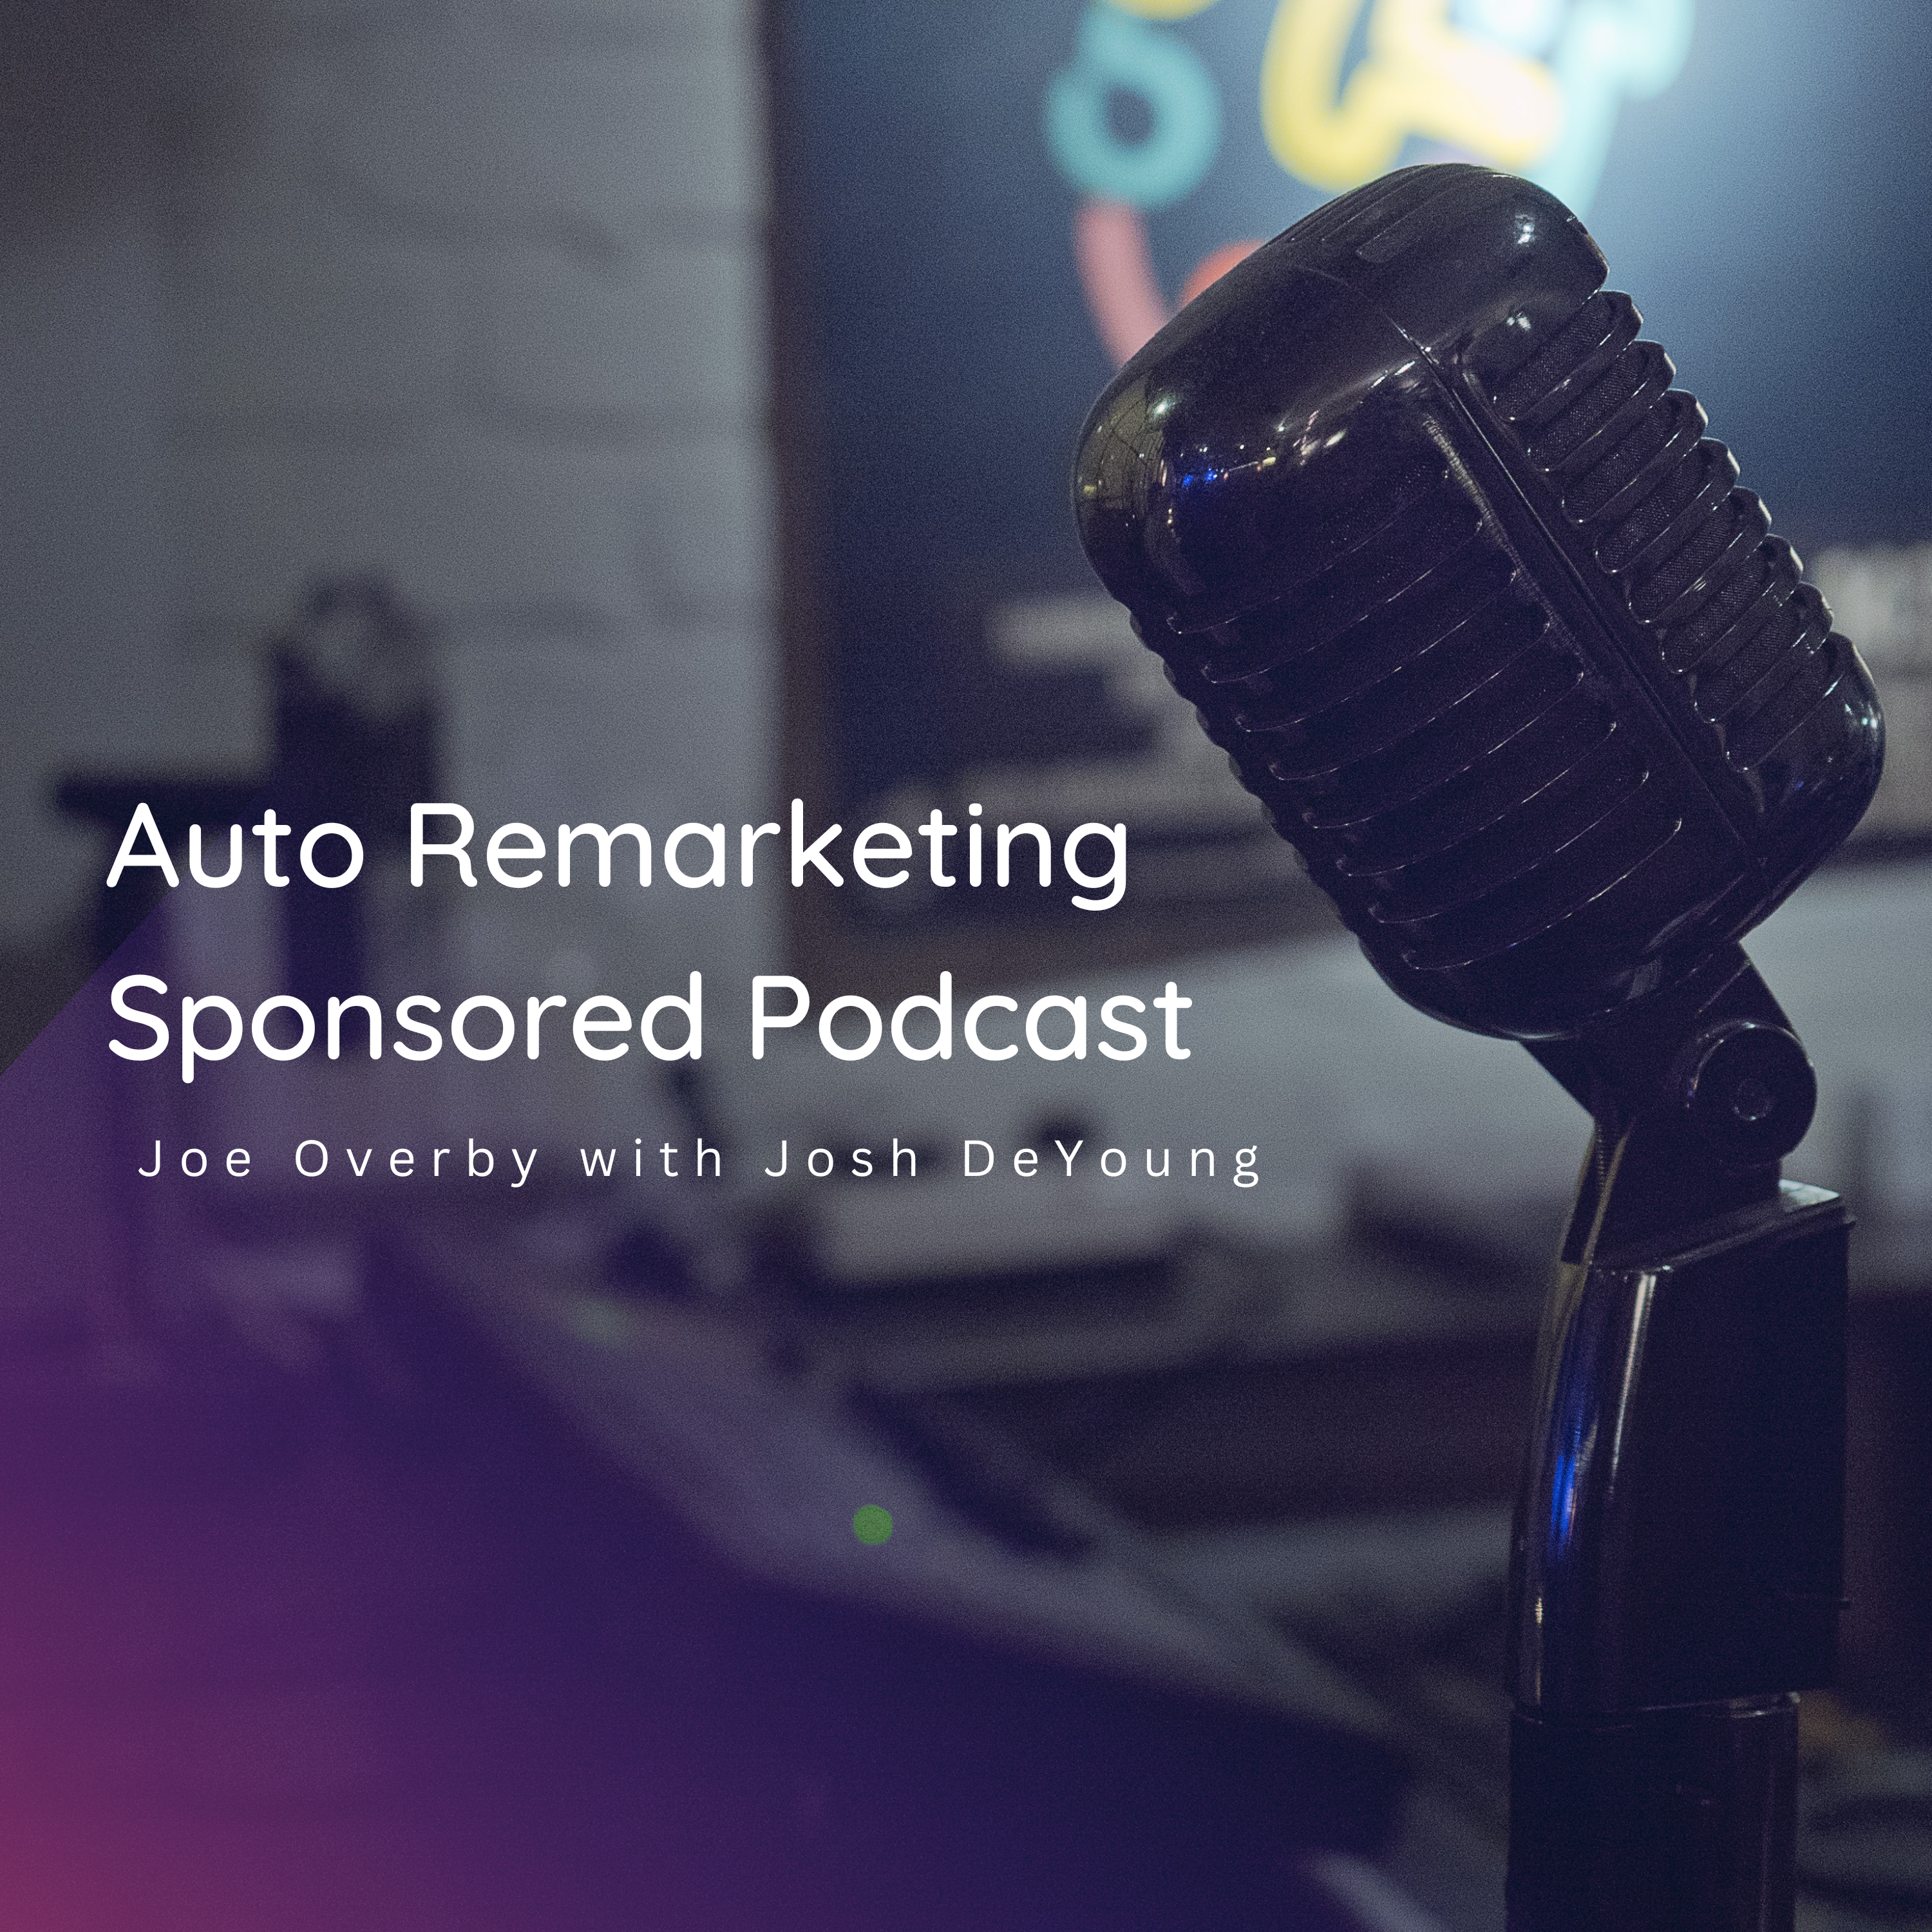 Josh DeYoung joins Joe Overby for a special sponsored podcast